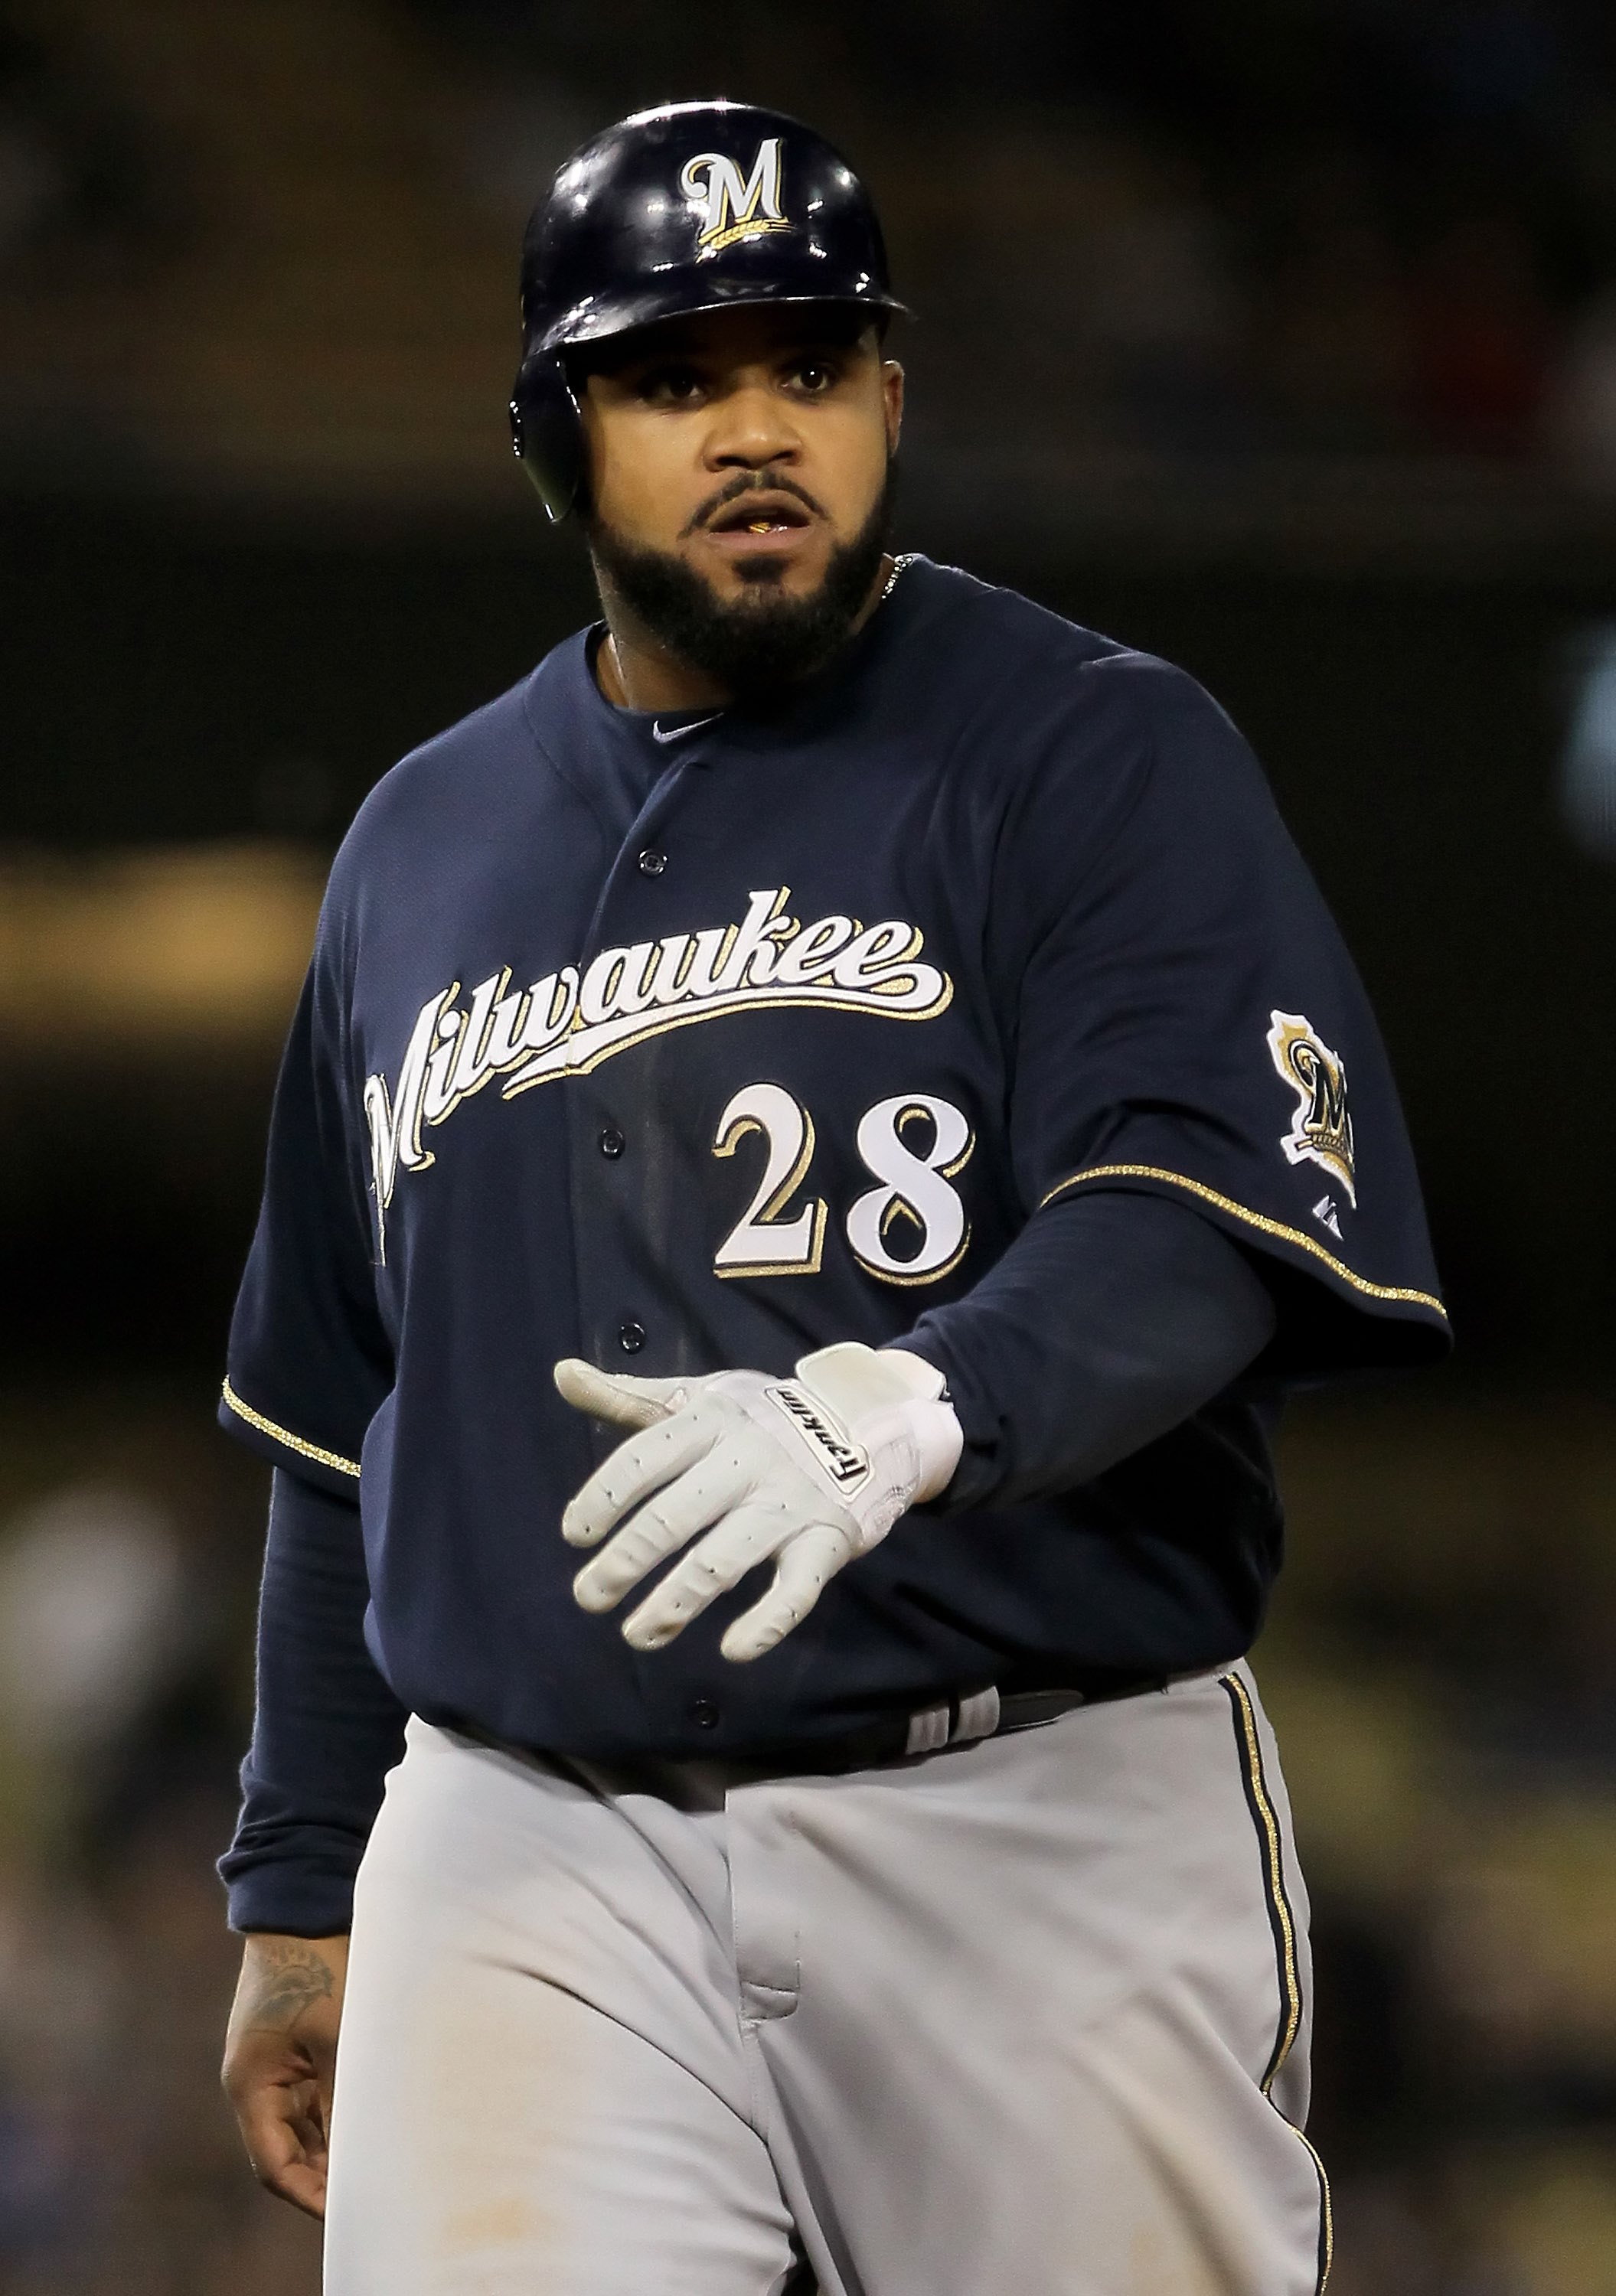 LOS ANGELES, CA - MAY 06:  Prince Fielder #28 of the Milwaukee Brewers plays against the Los Angeles Dodgers at Dodger Stadium on May 6, 2010 in Los Angeles, California.  (Photo by Jeff Gross/Getty Images)